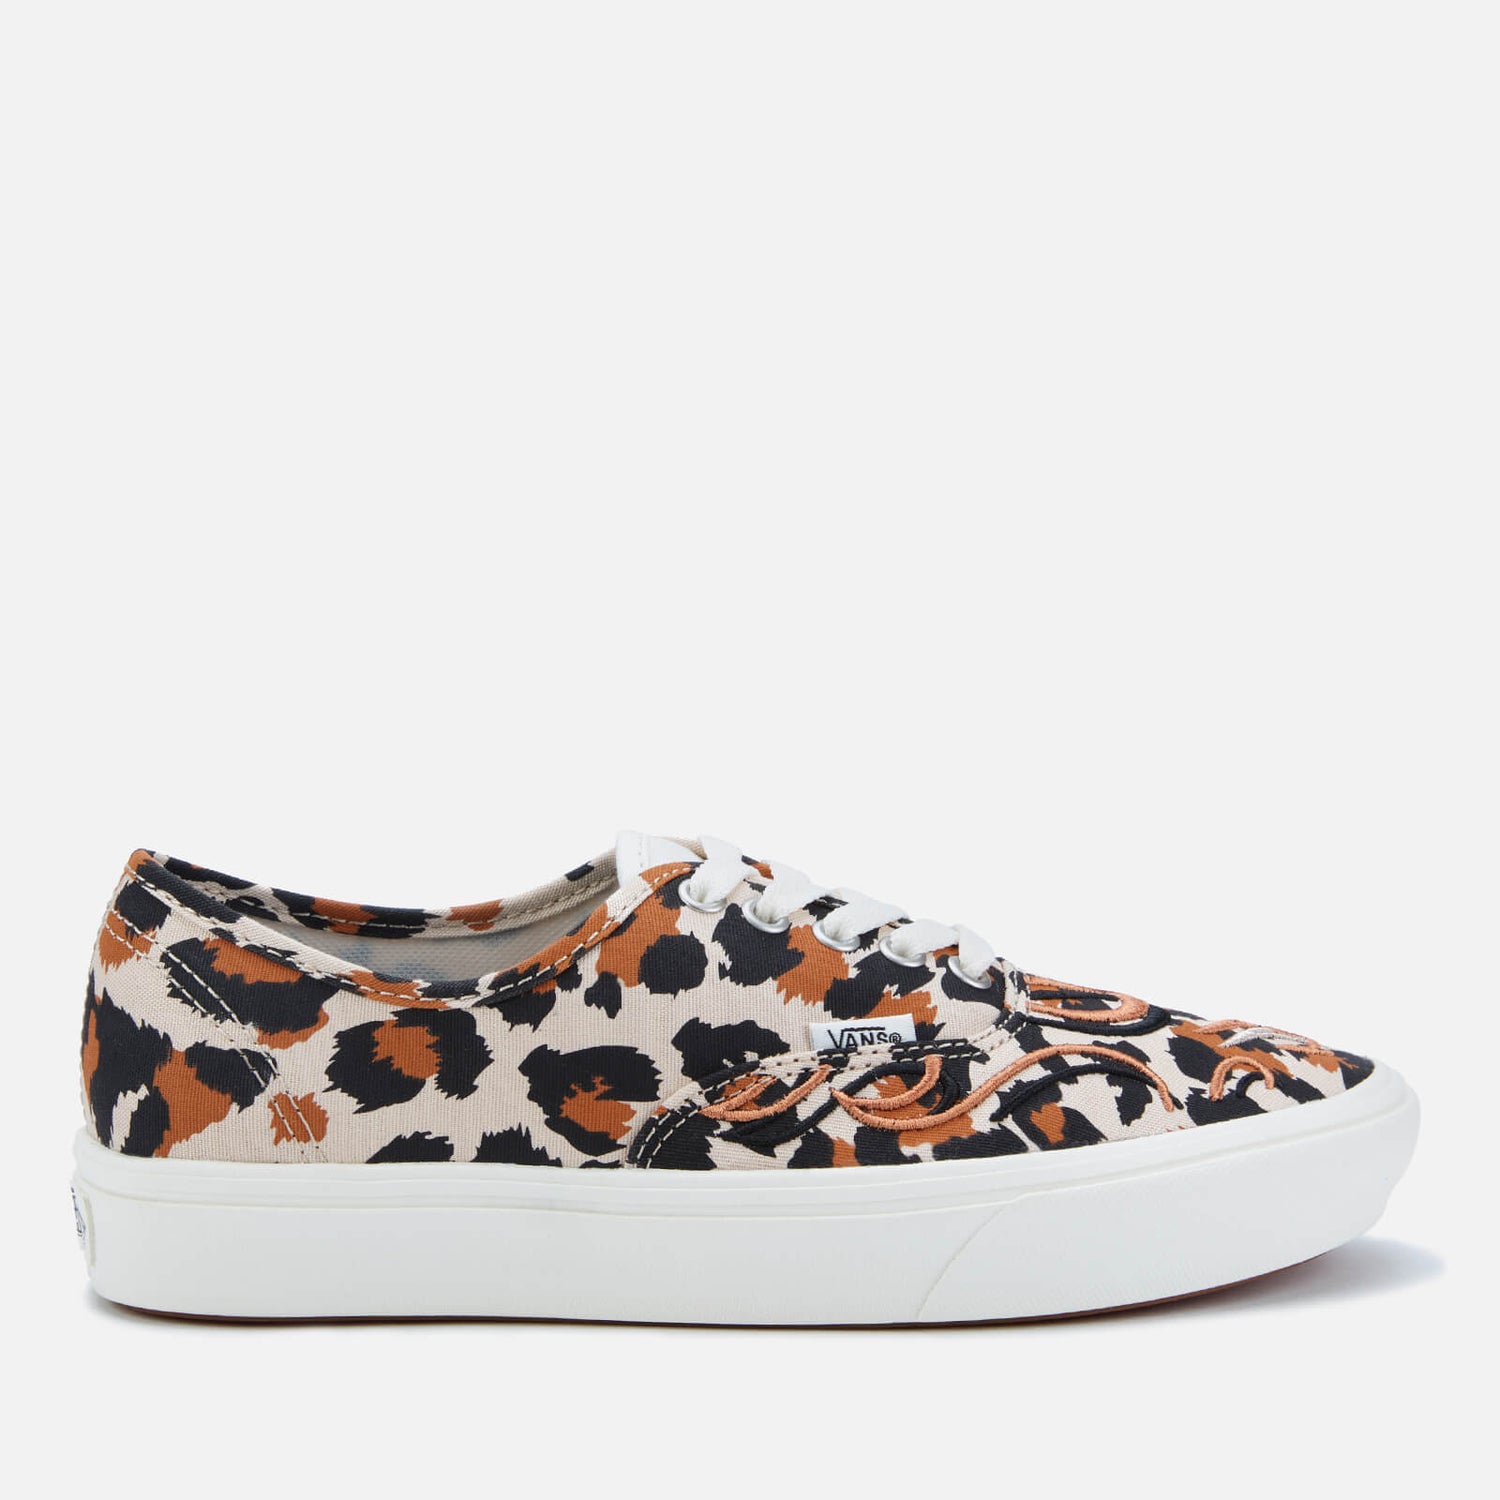 Vans Comfycush Flame Embroidery Authentic Trainers - Leopard/Marshmallow